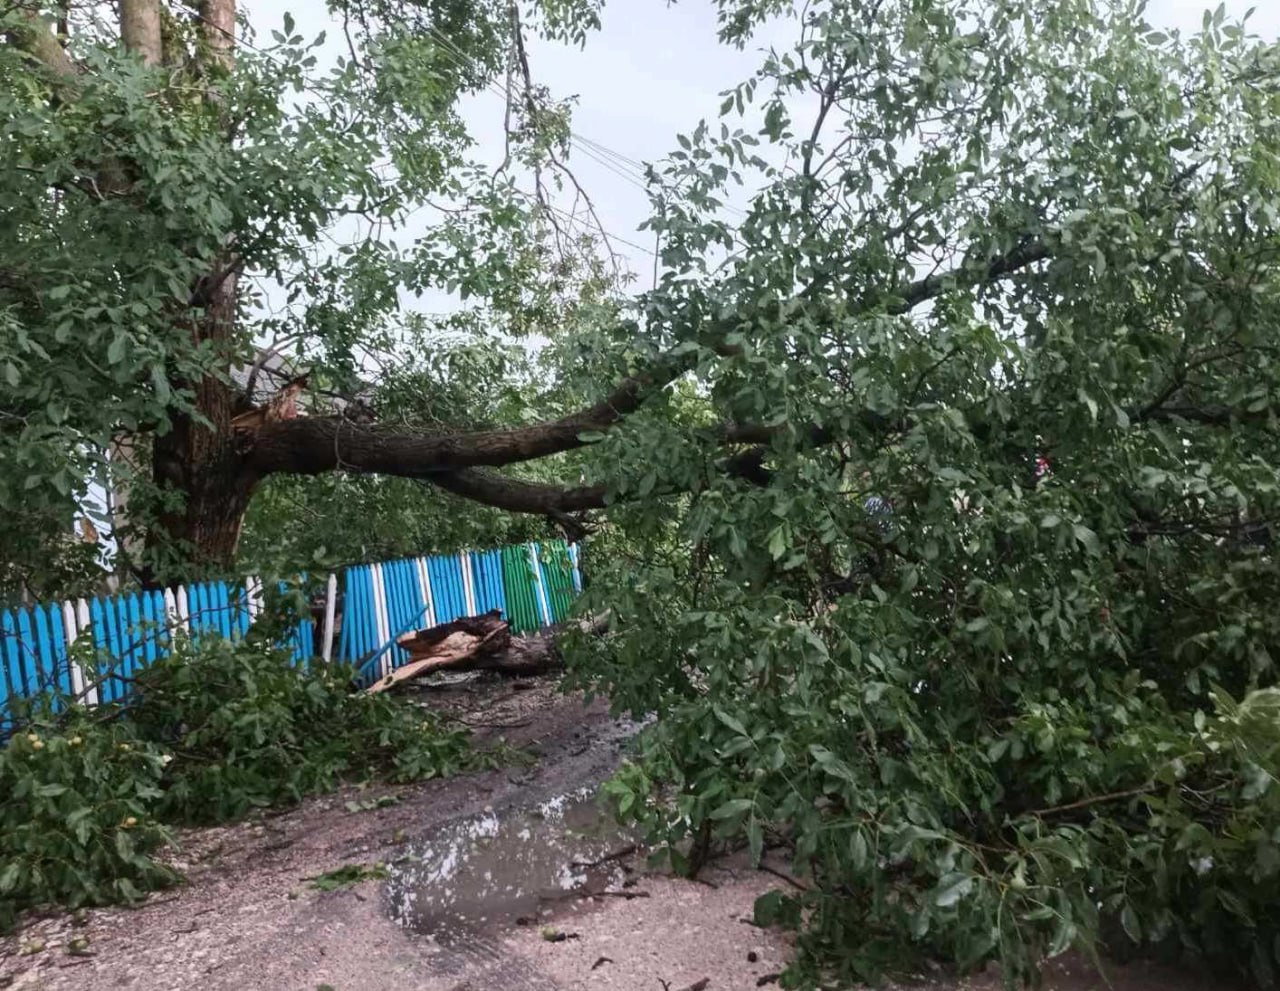 Moldova Battered by Severe Weather: Homes, Roofs Damaged